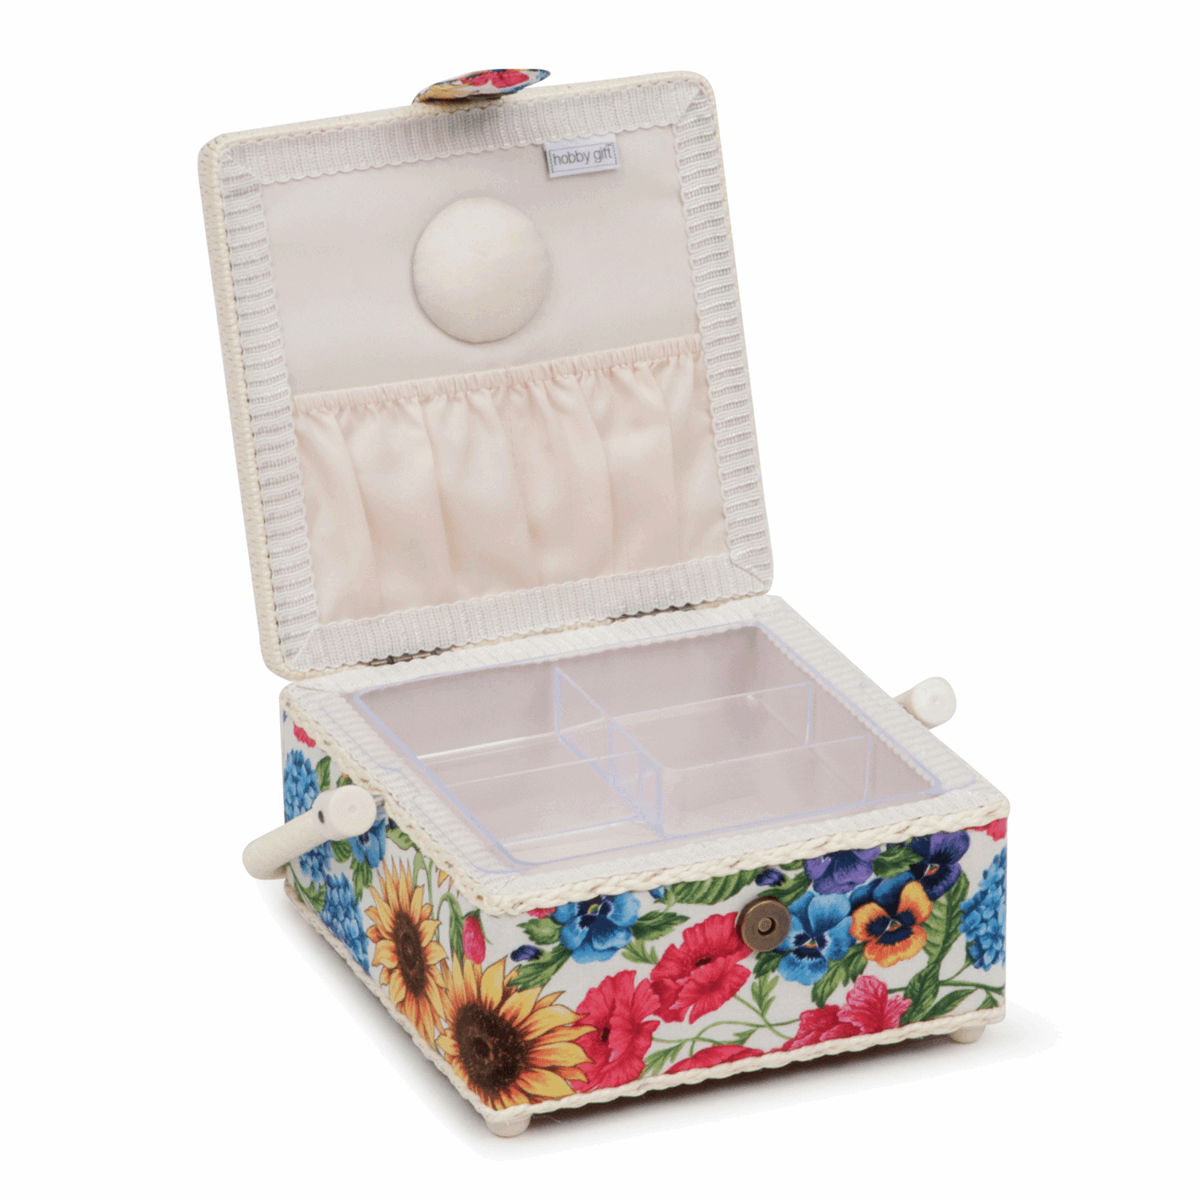 Garden Floral Sewing Box - Small Square